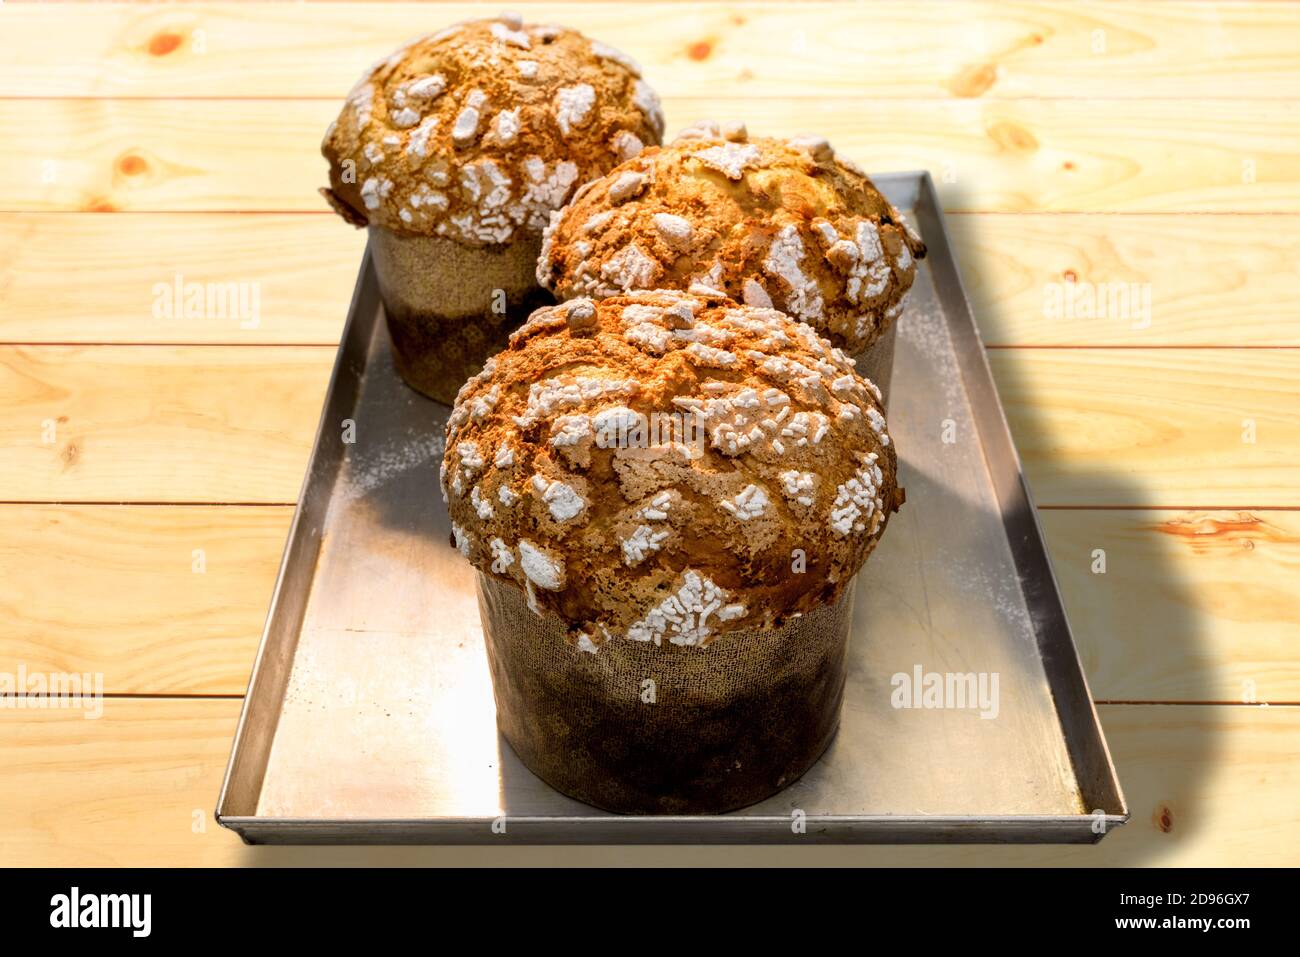 Panettone, typical Italian Christmas cake from Milan, freshly baked on baking sheet and wooden background Stock Photo